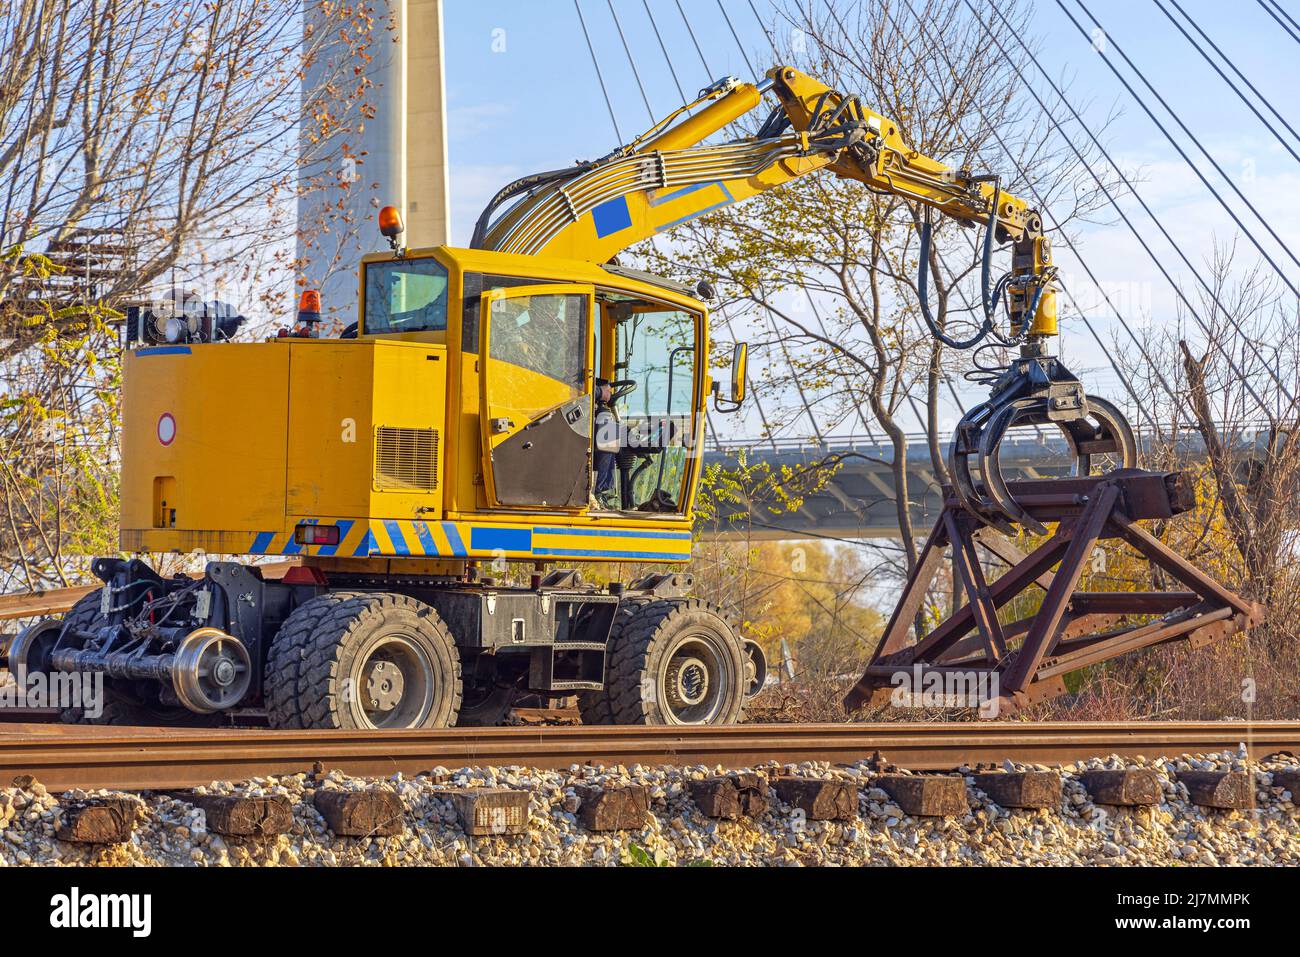 Removing Old Railroad Buffer Stop and Railway Tracks With Grappling Forks Digger Stock Photo